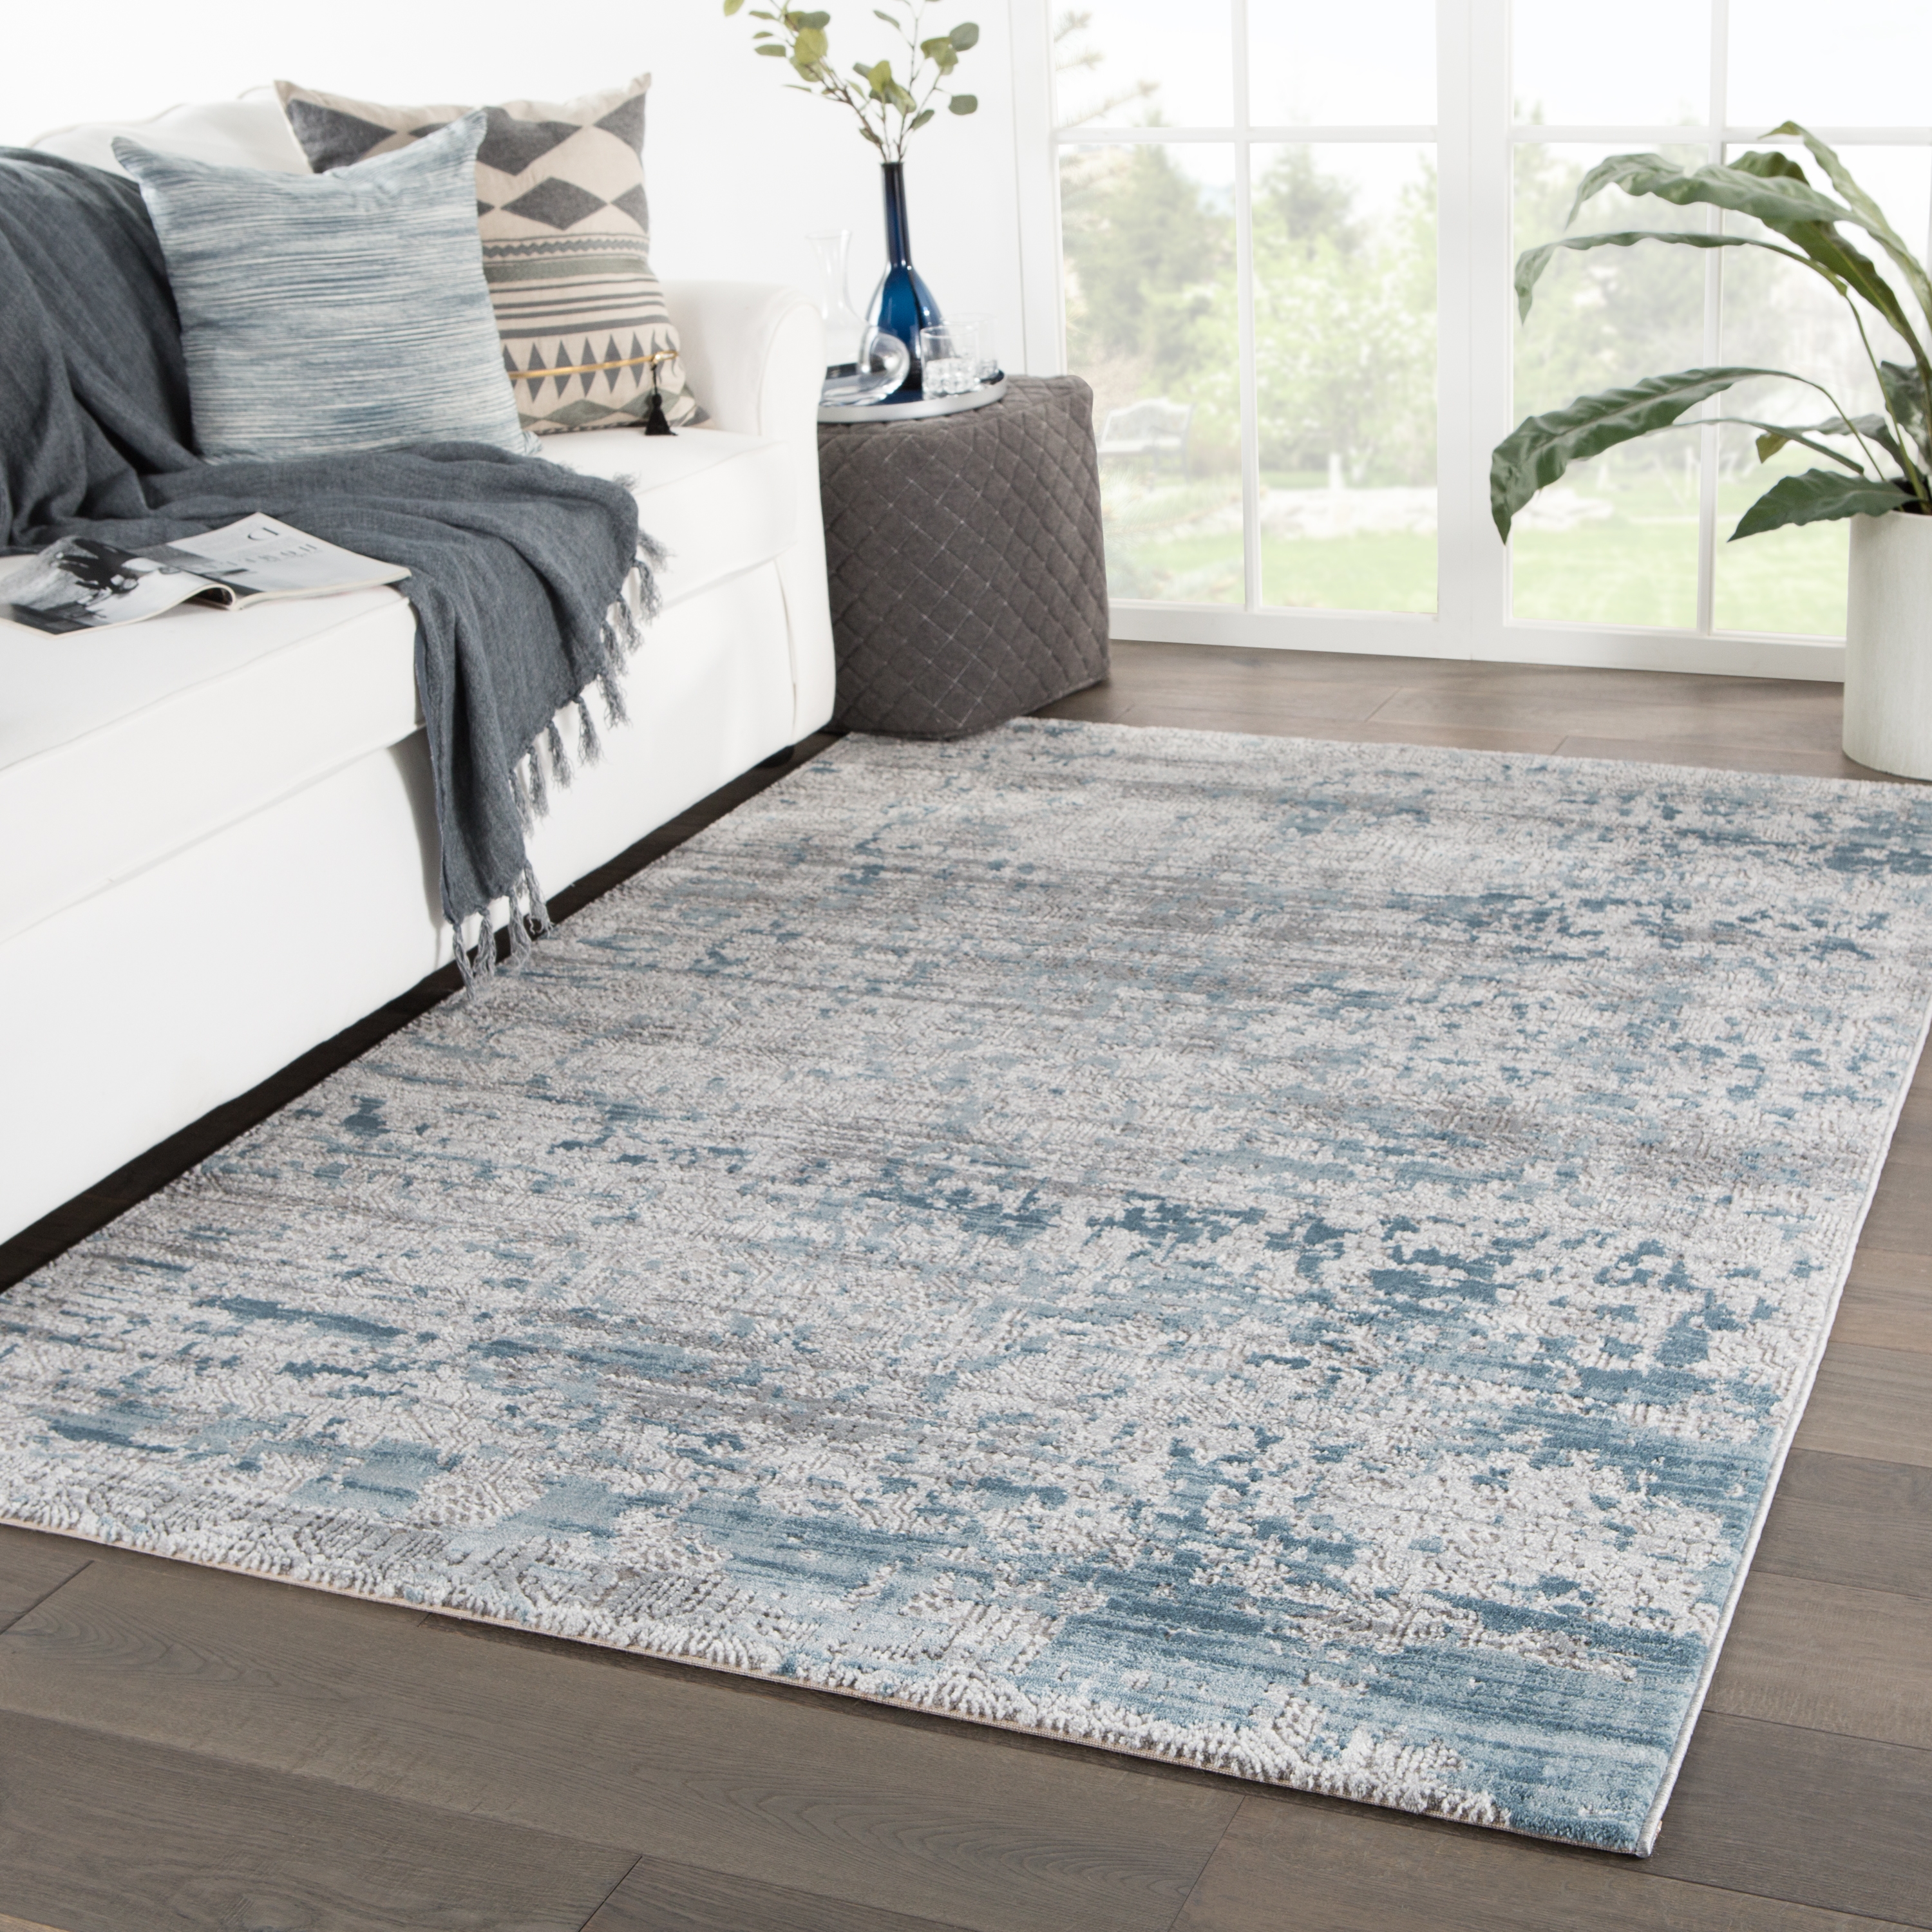 Skiway Medallion Silver/ Blue Area Rug (7'10"X10'2") - Image 4